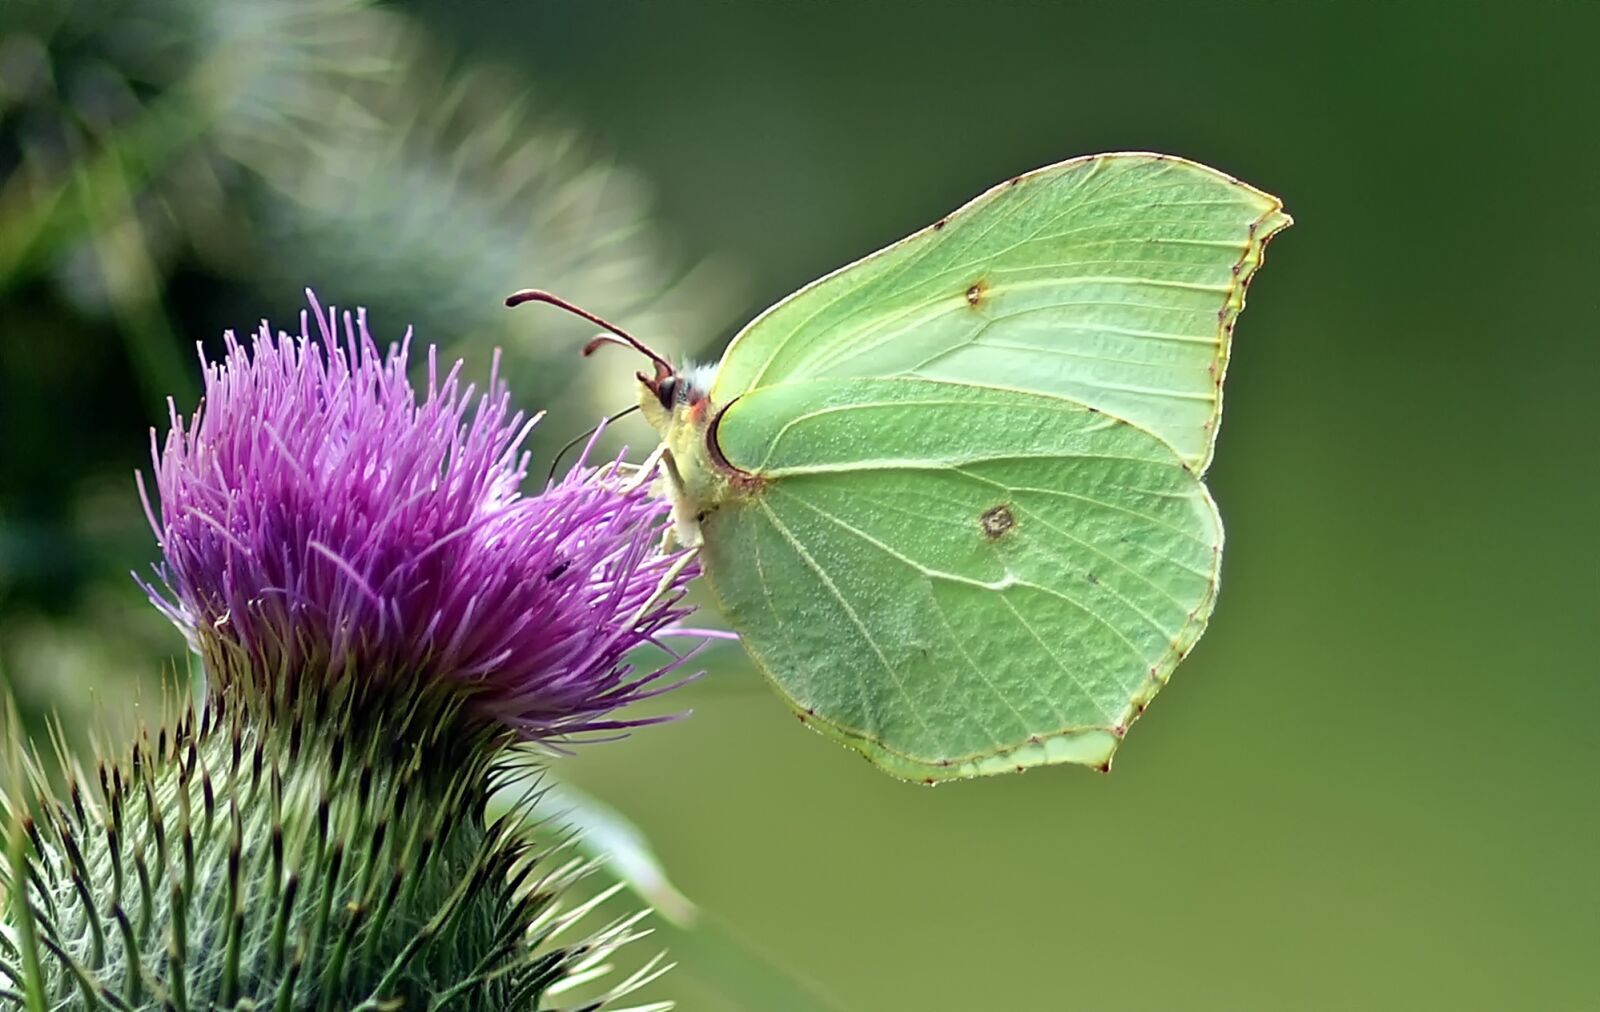 Olympus E-30 sample photo. Gonepteryx rhamni, butterfly, butterflies photography